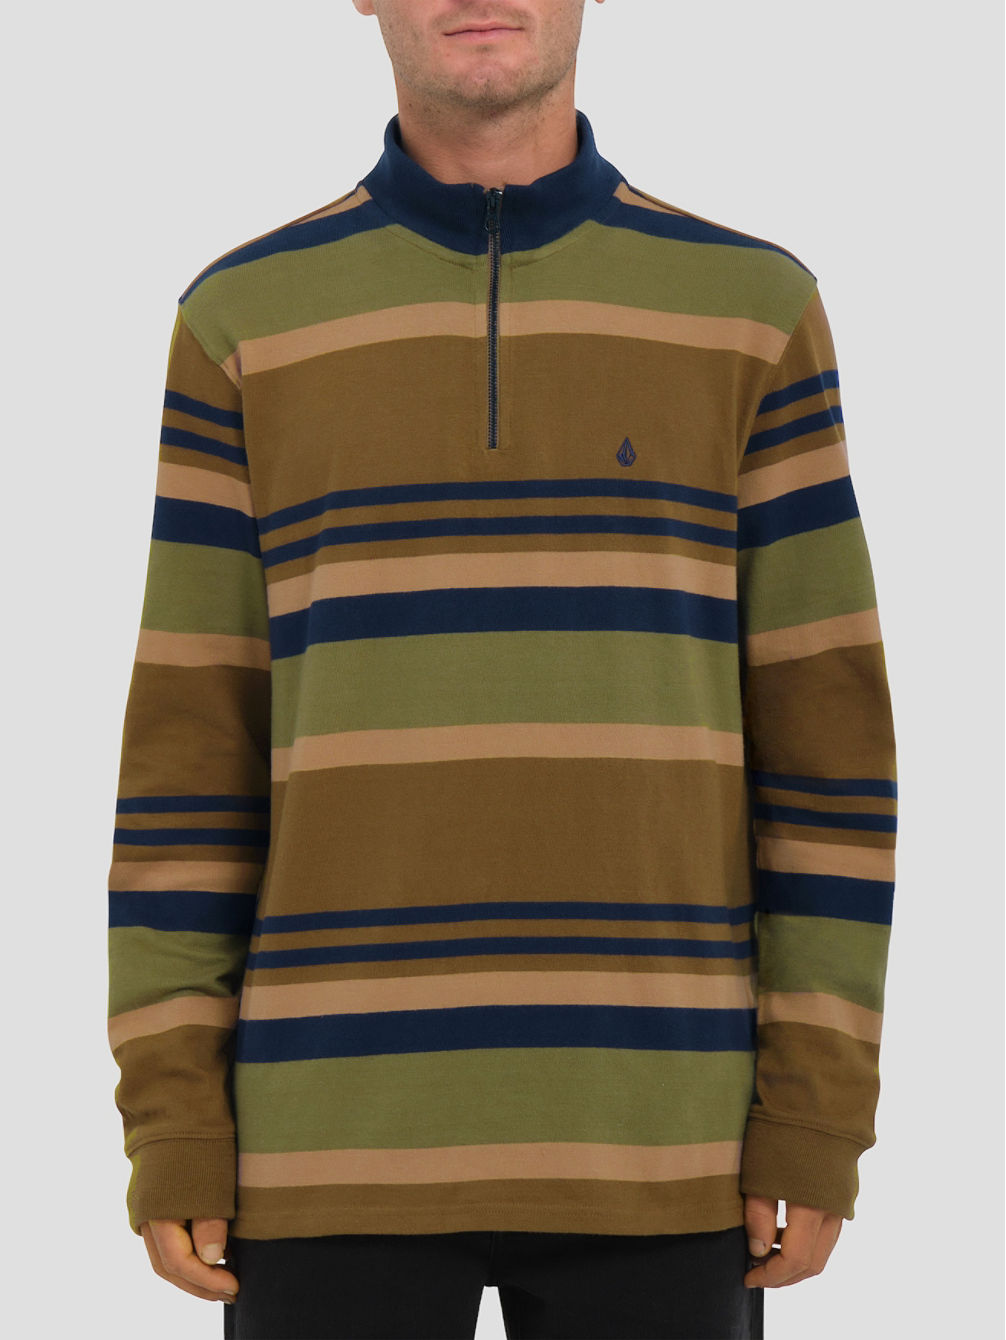 Forger Crew Sweater